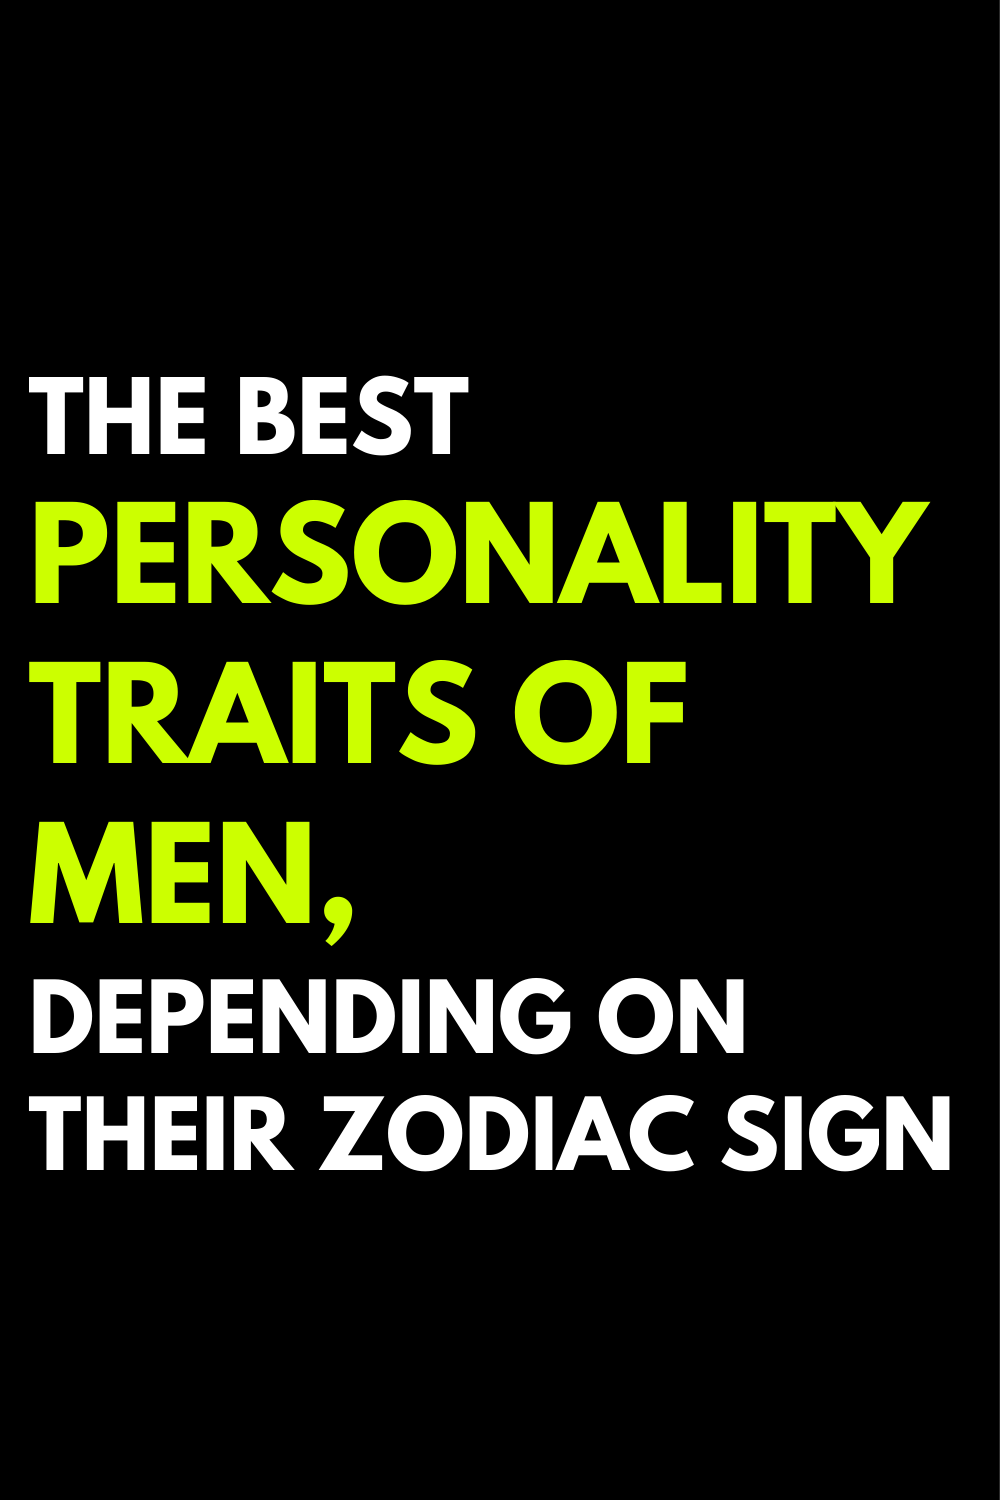 The best personality traits of men, depending on their zodiac sign